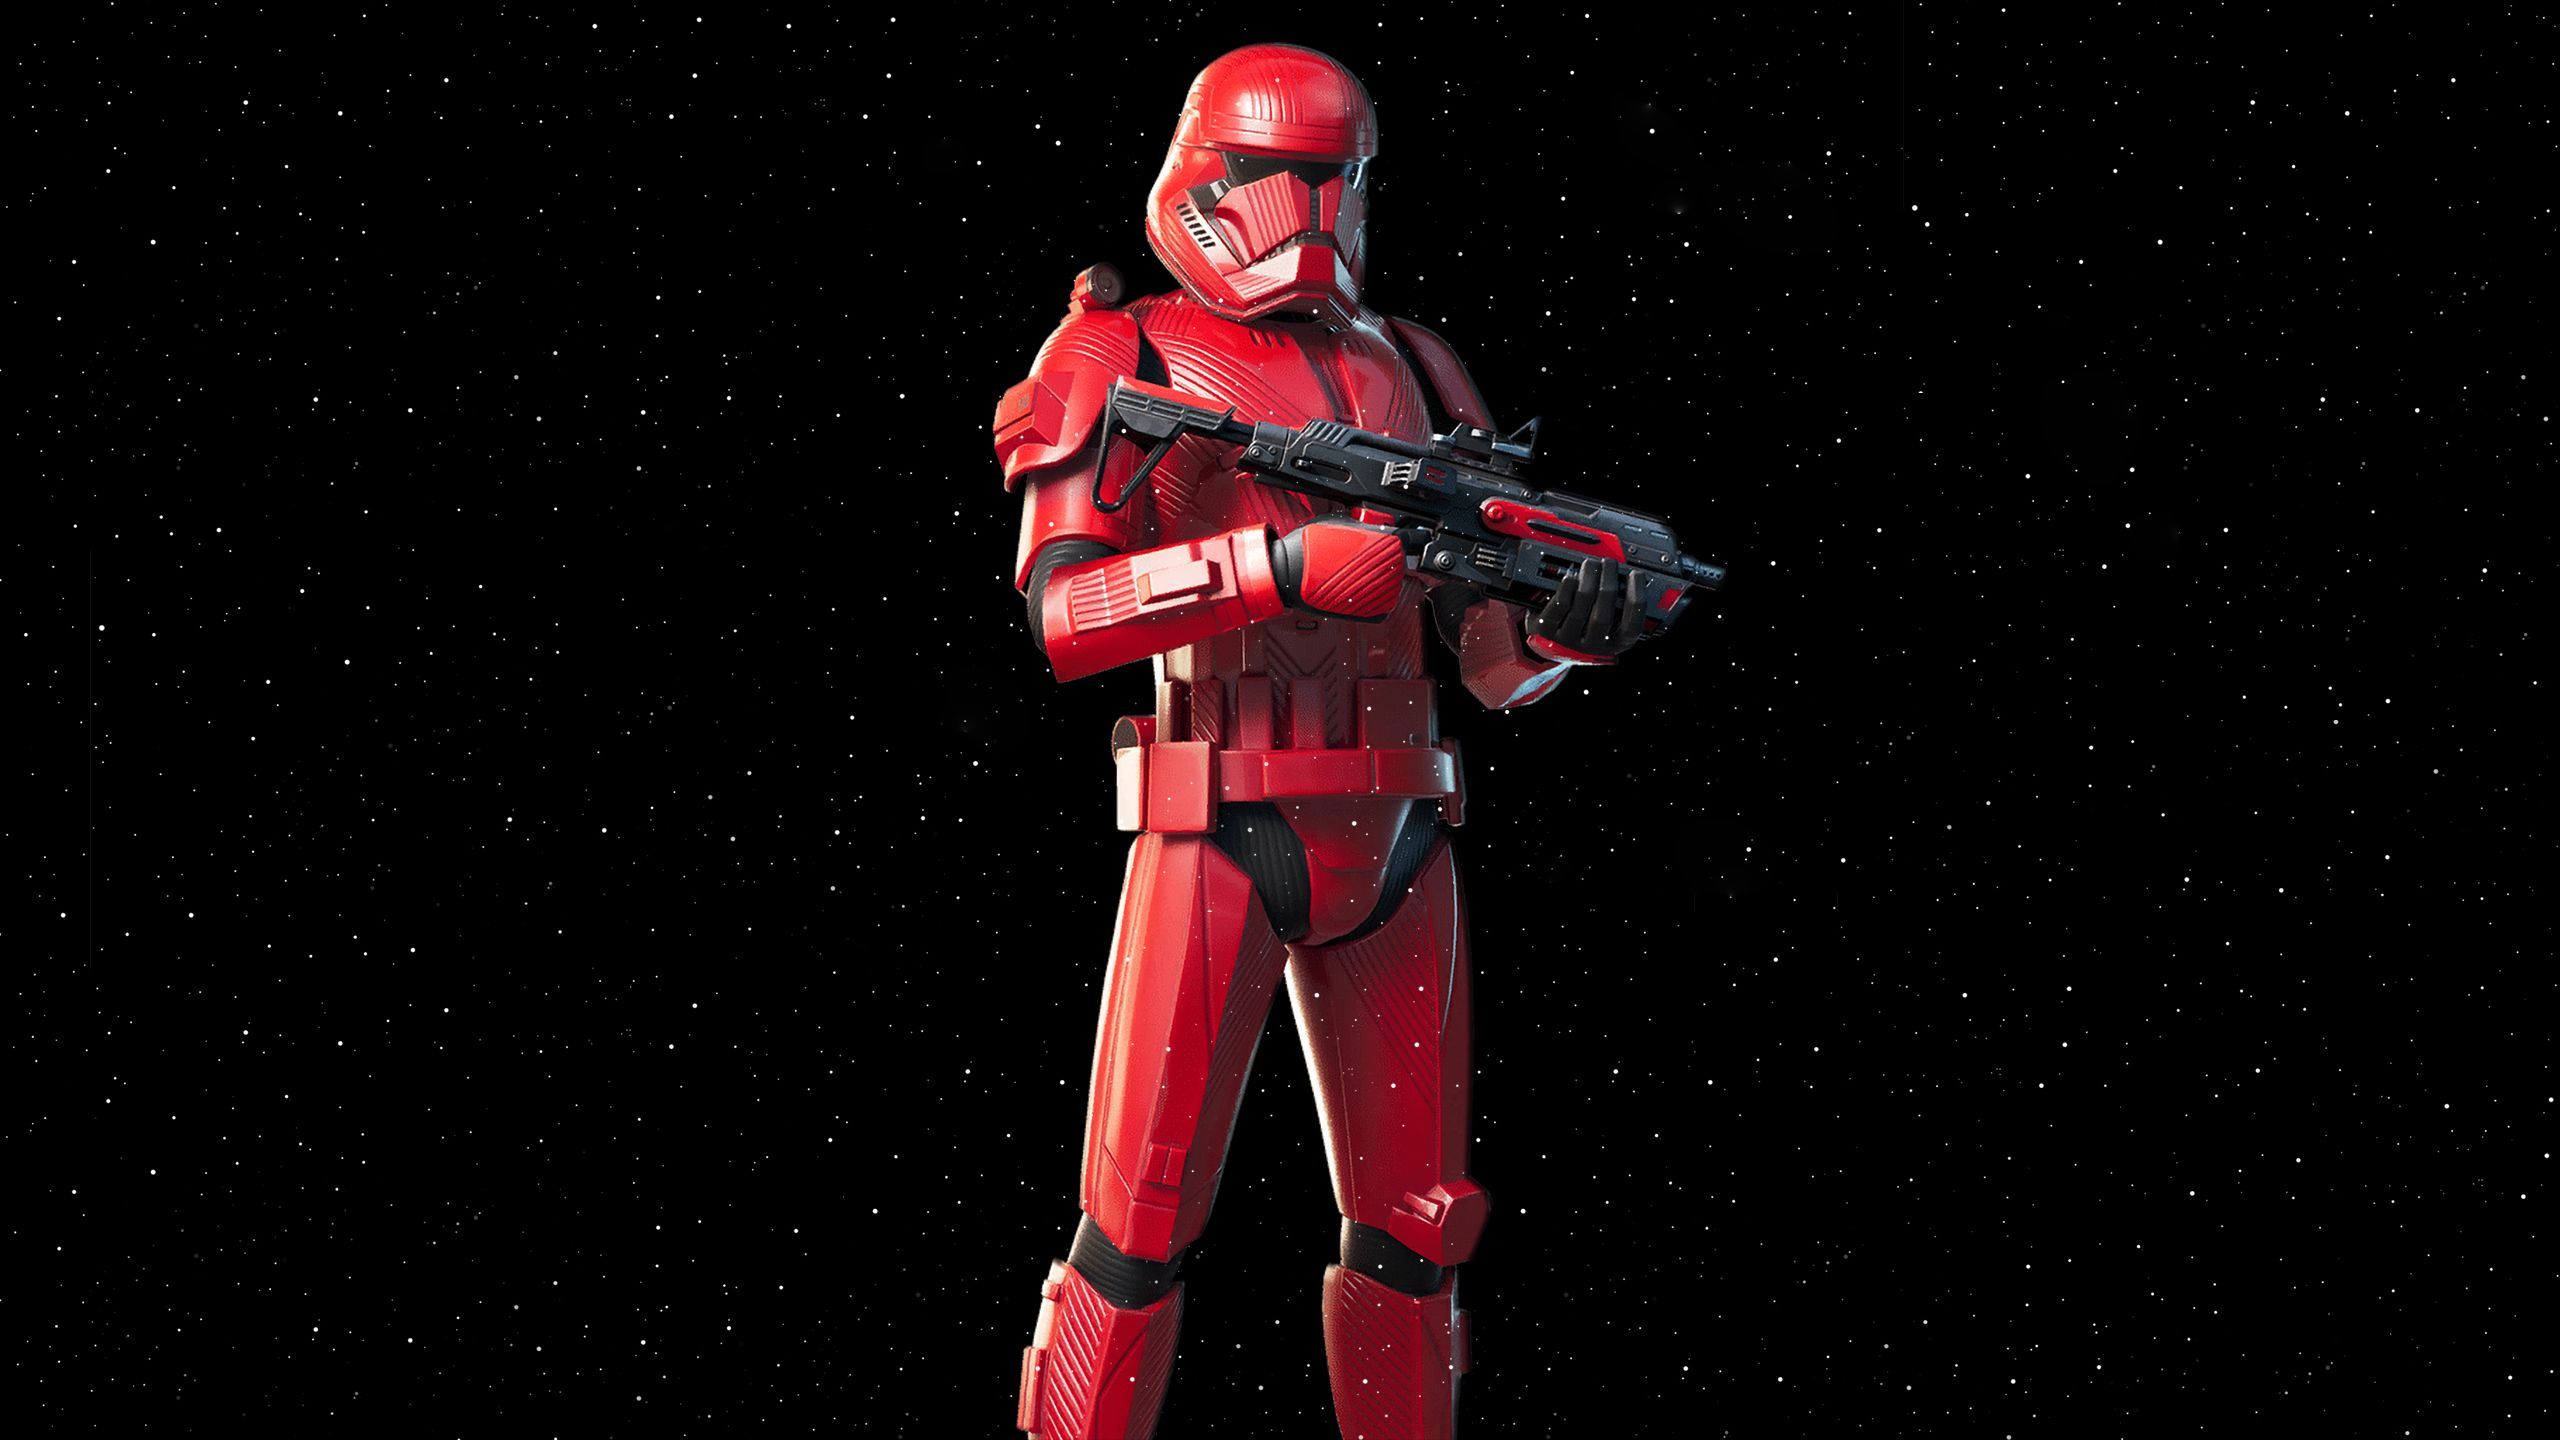 Sith Trooper Wallpaper Free Sith Trooper Background